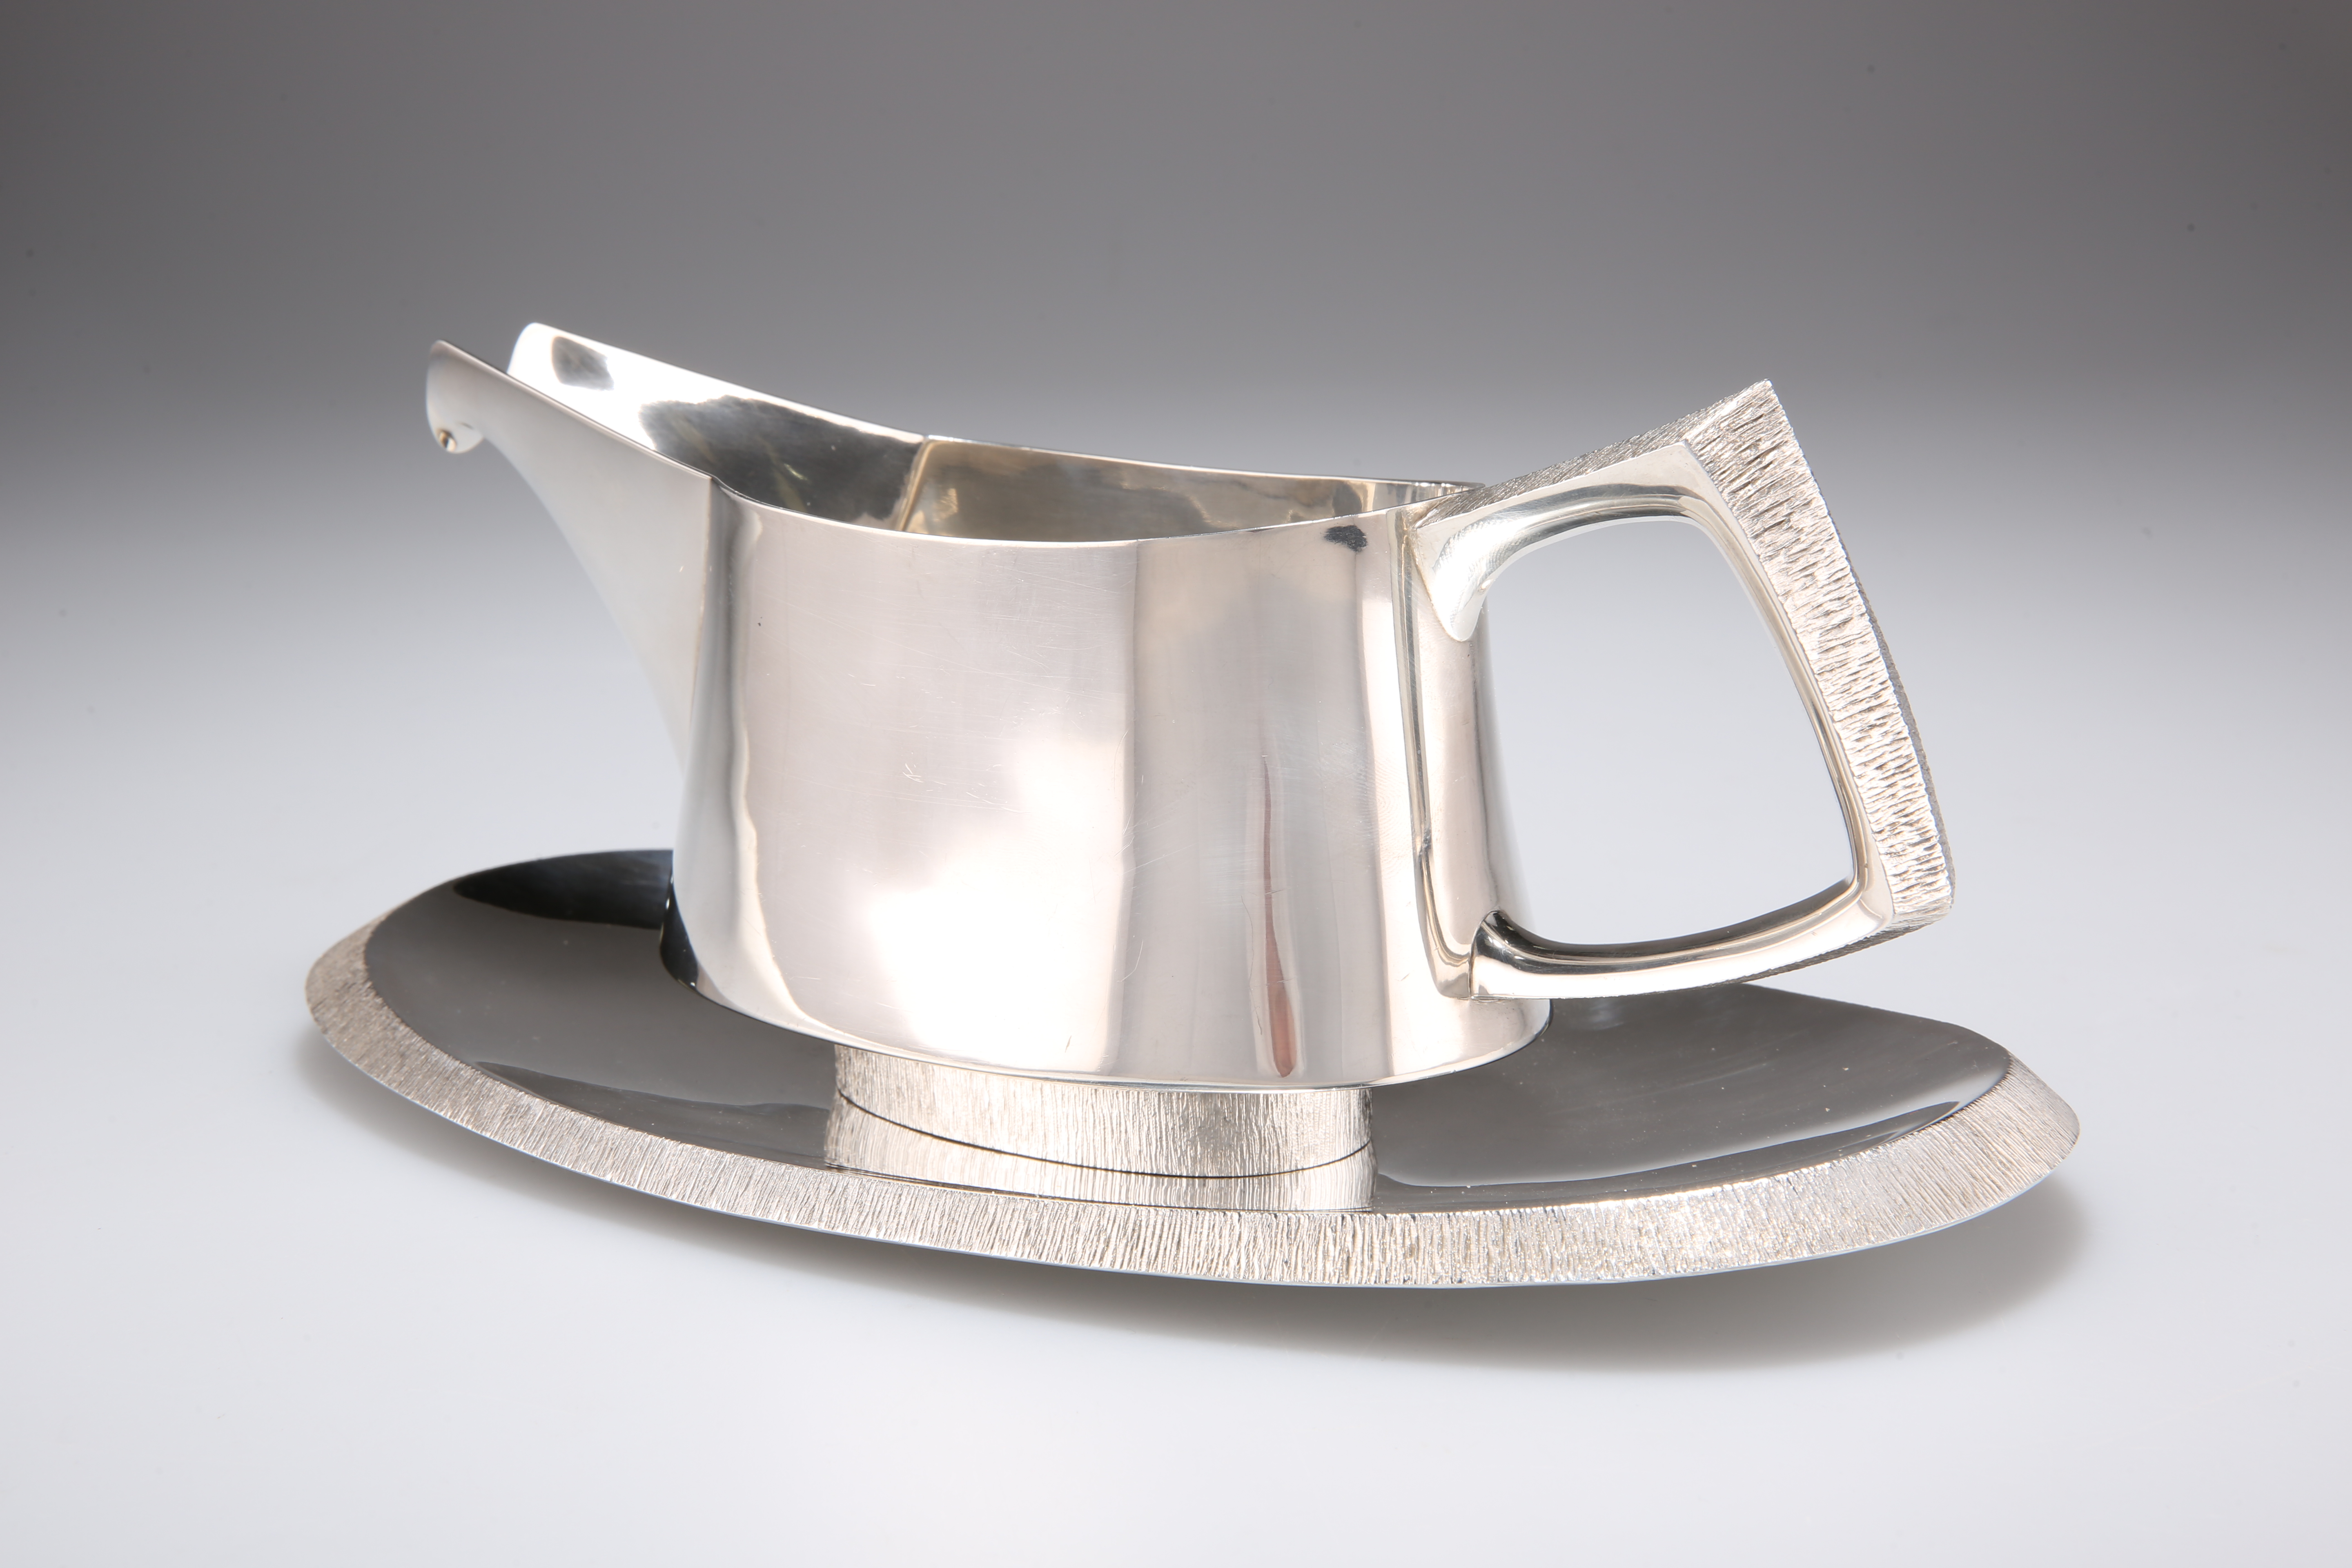 CHRISTOPHER NIGEL LAWRENCE (BORN 1936), AN ELIZABETH II SILVER SAUCE BOAT ON STAND - Image 2 of 3